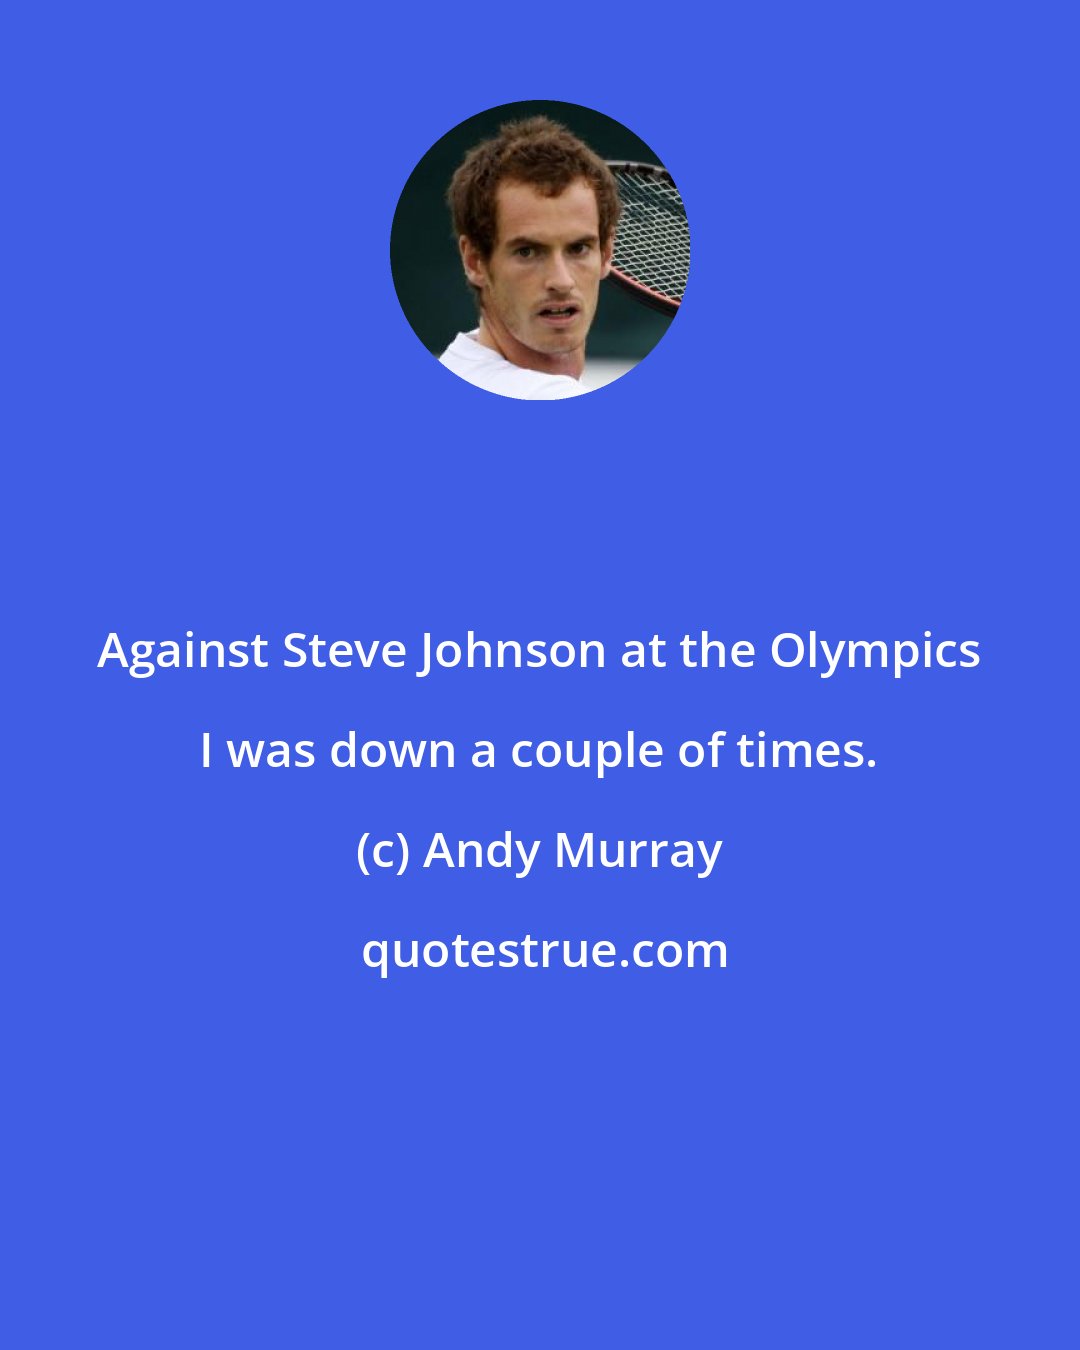 Andy Murray: Against Steve Johnson at the Olympics I was down a couple of times.